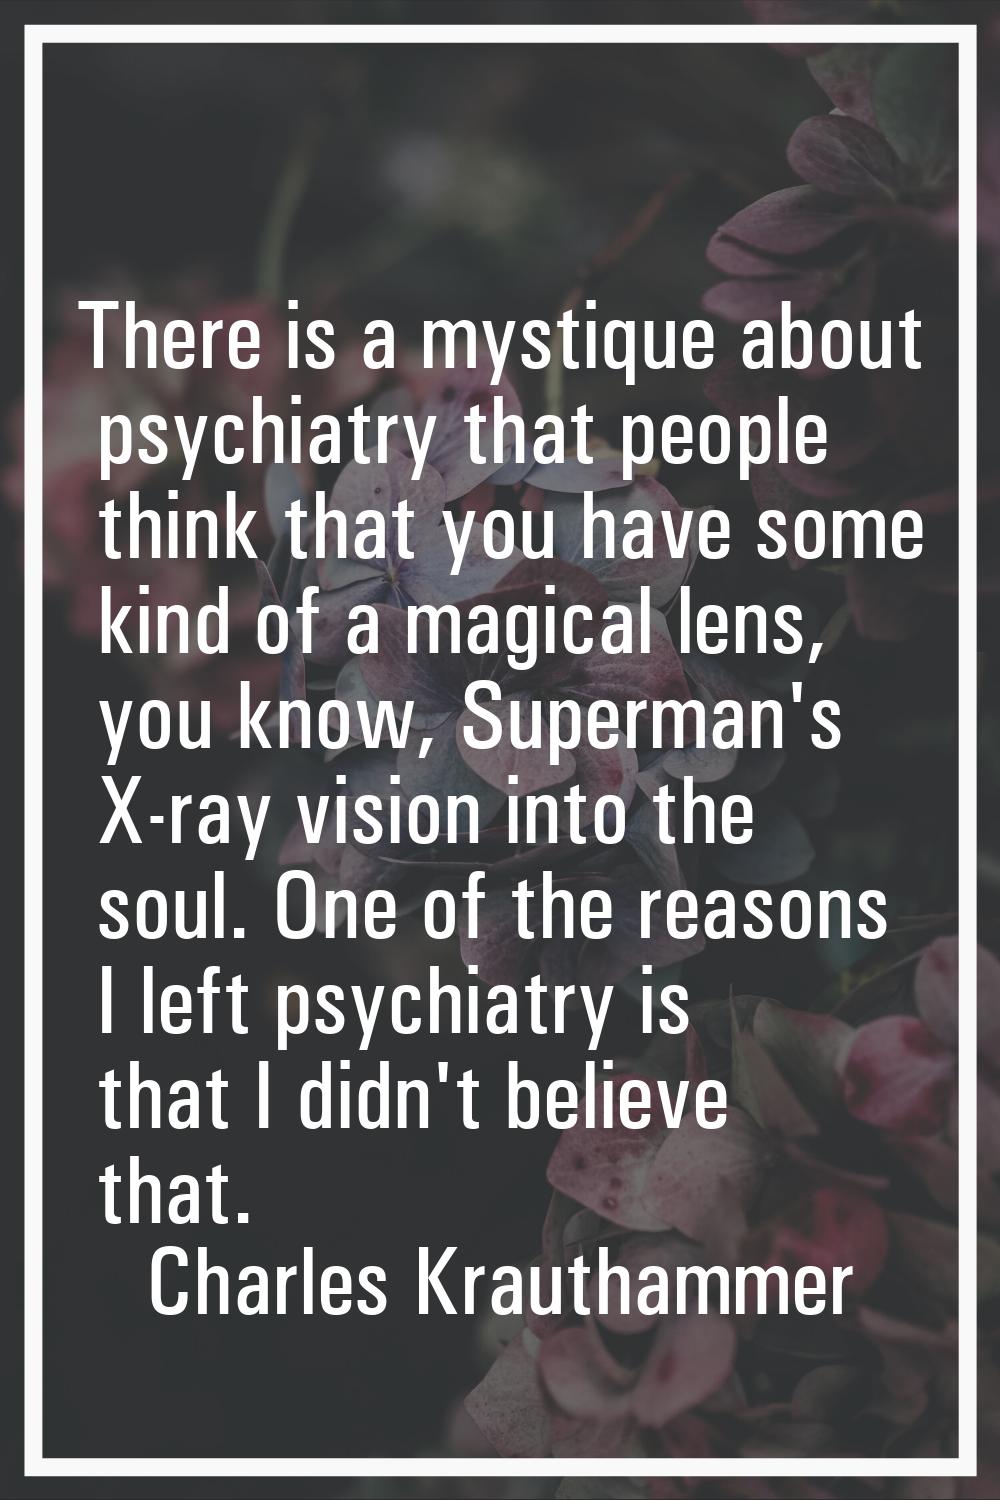 There is a mystique about psychiatry that people think that you have some kind of a magical lens, y